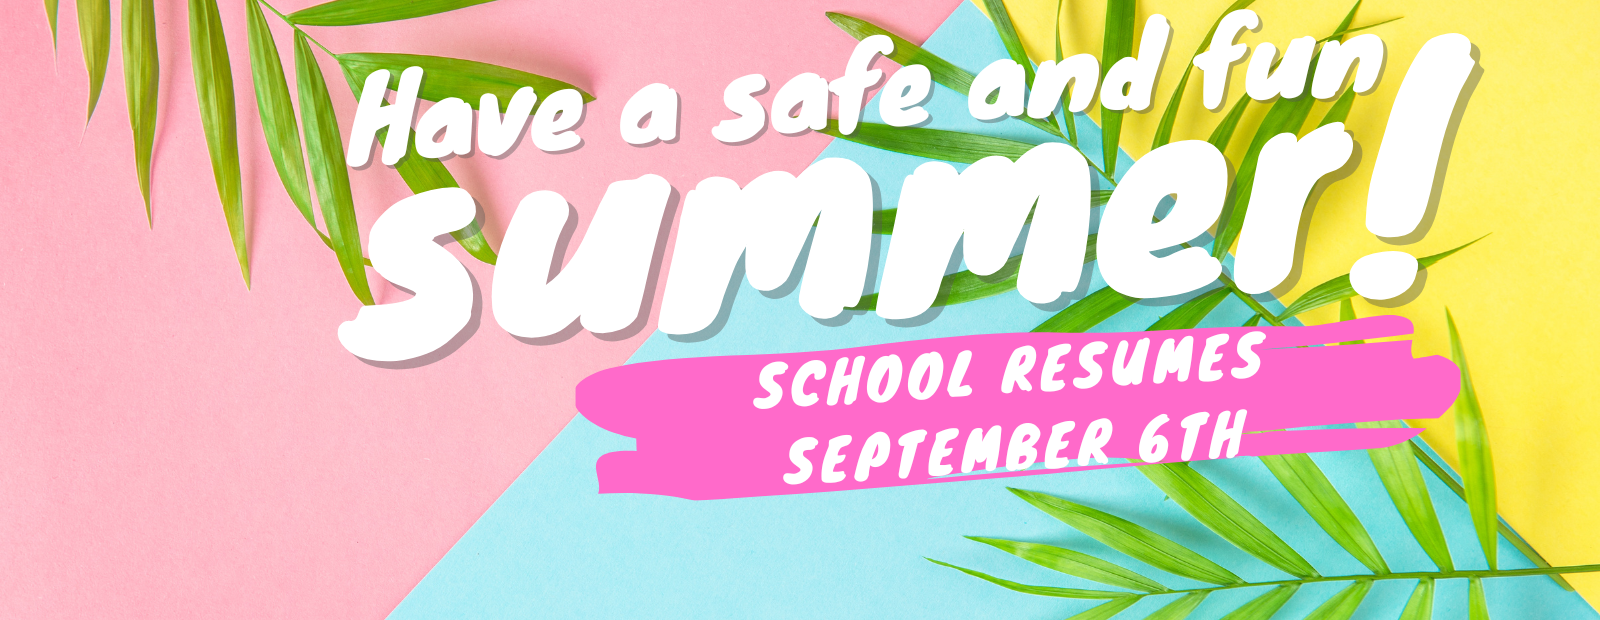 Have a safe and fun summer break